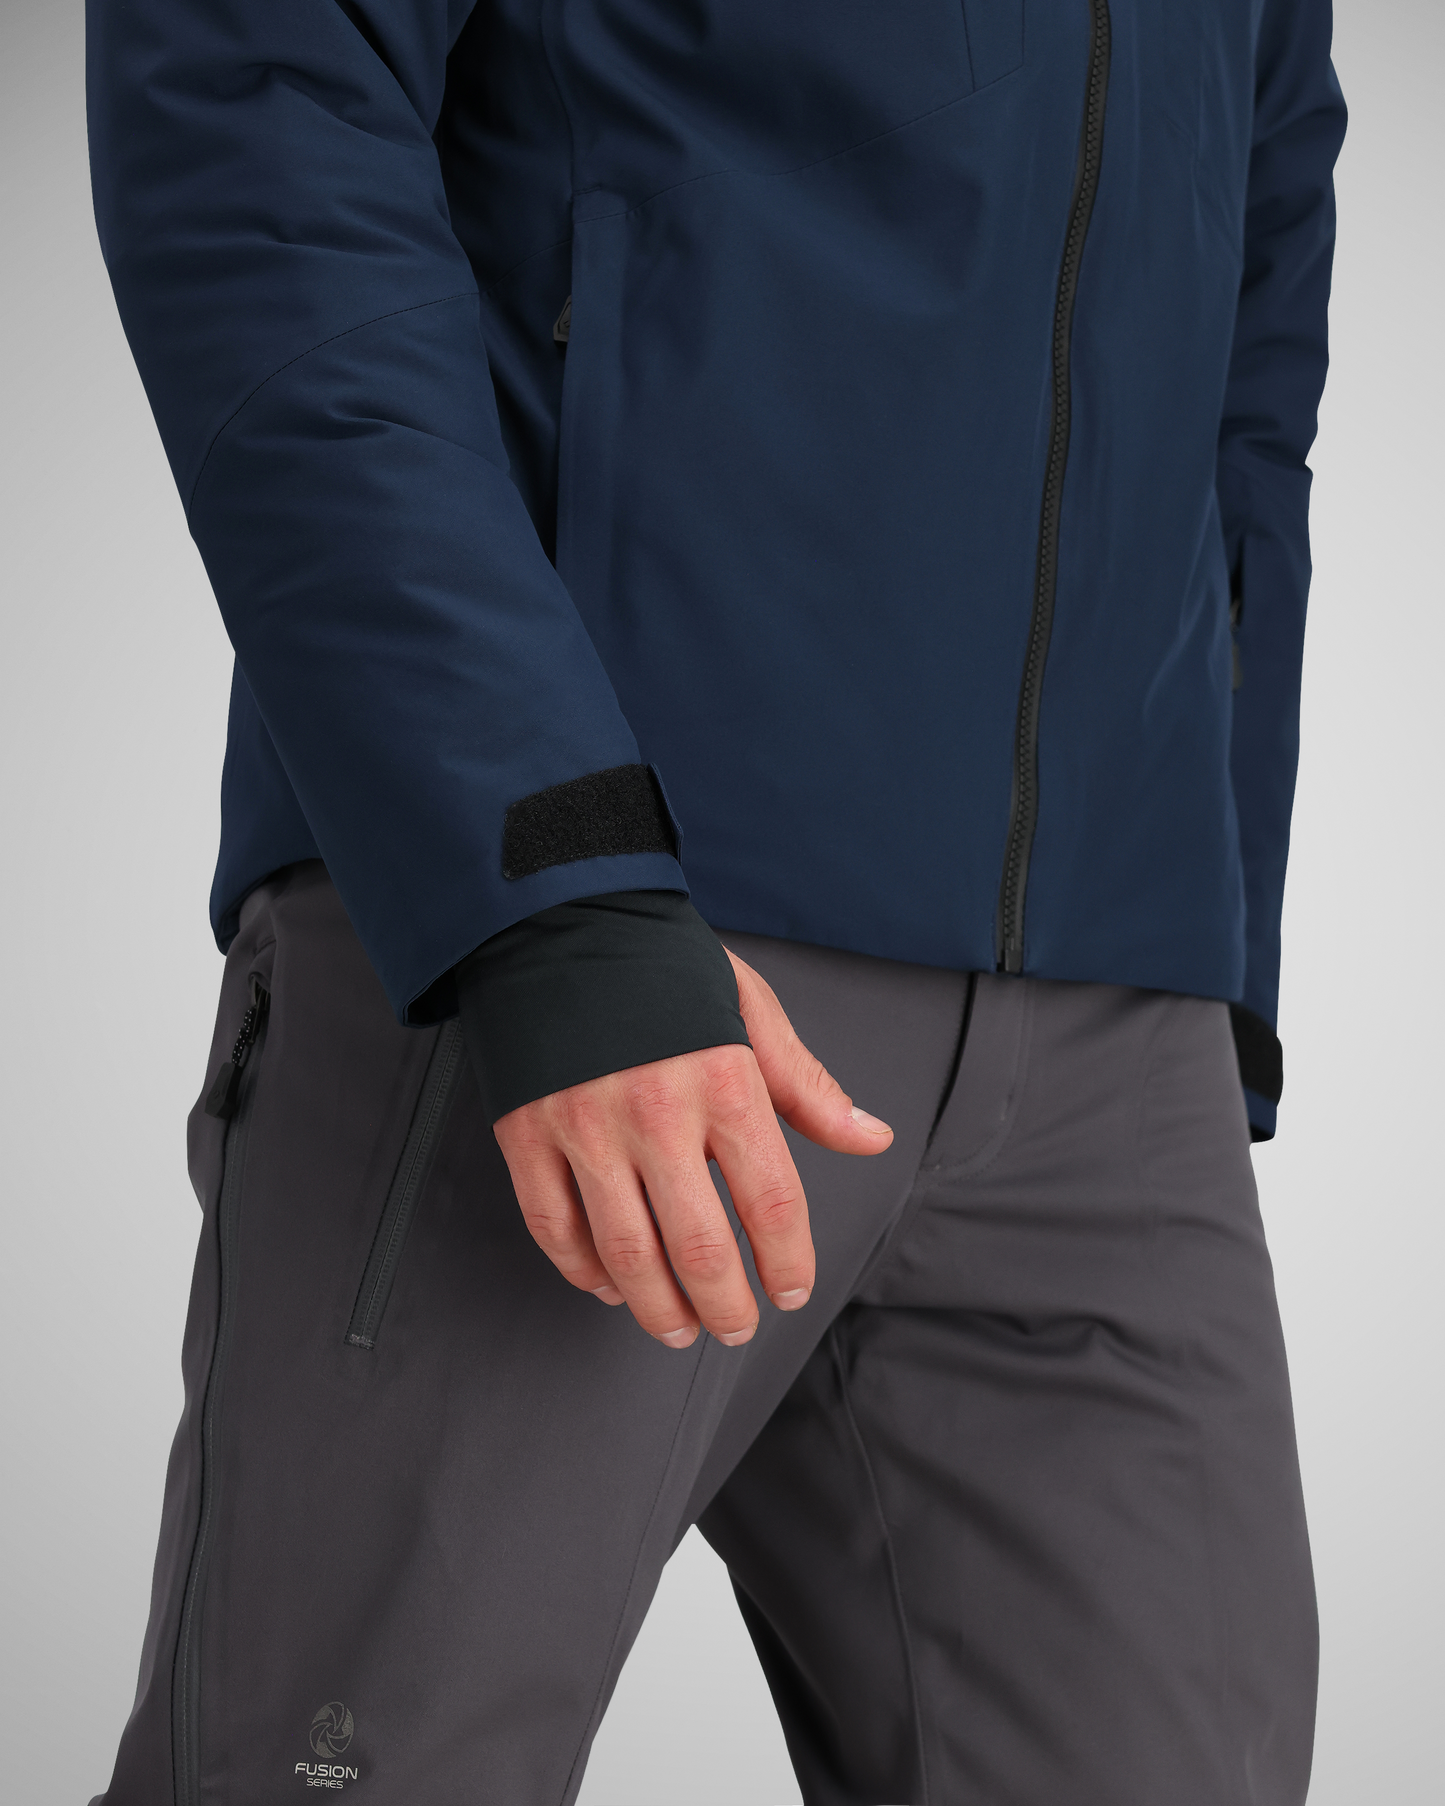 Thumbhole inner cuffs | Good weather protection begins by keeping out the cold and moisture, and securing openings between pieces of gear is critical in times of unpredictable weather conditions.